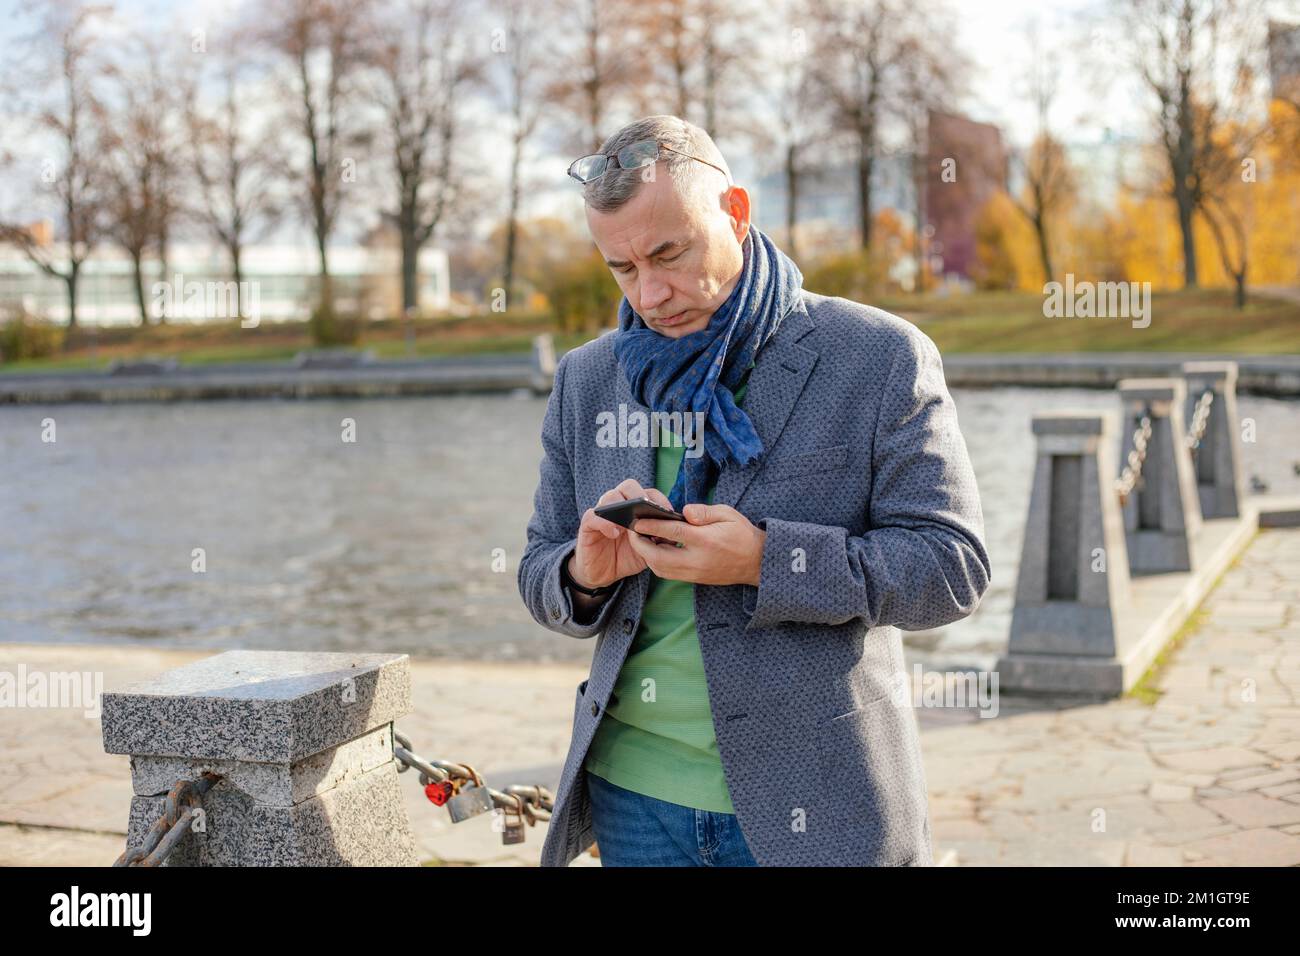 Portrait of middle-aged man standing near concrete pillars joined with chains in city in autumn, looking at smartphone. Stock Photo